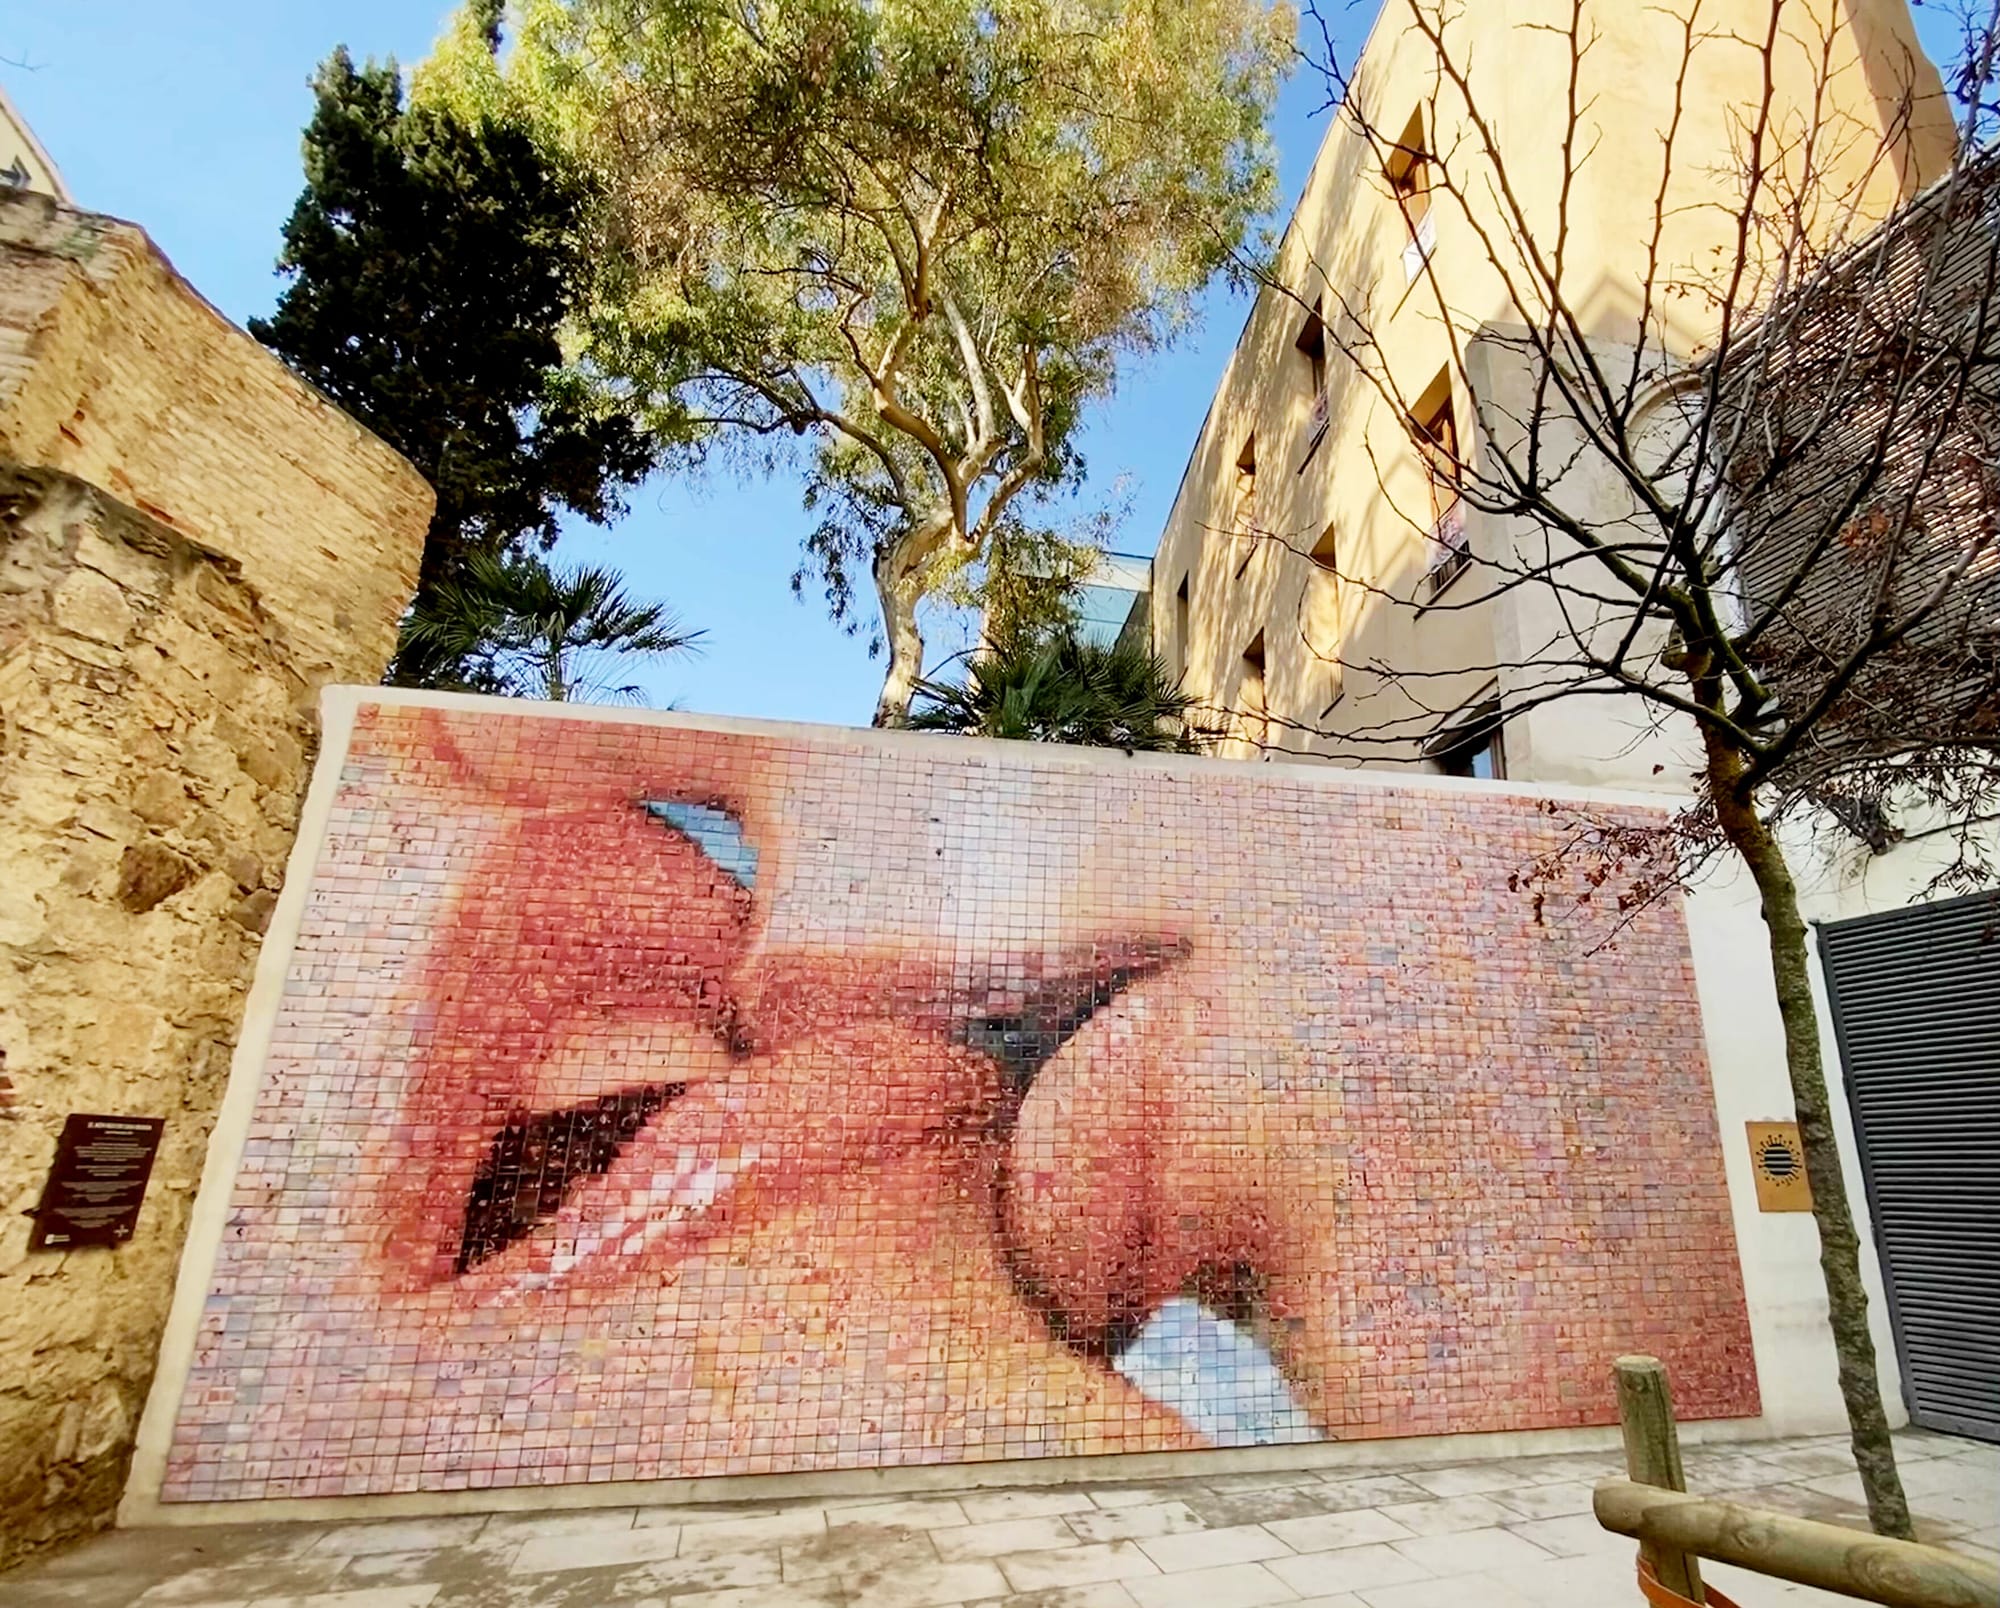 historic things to see in the gothic quarter - kiss mural